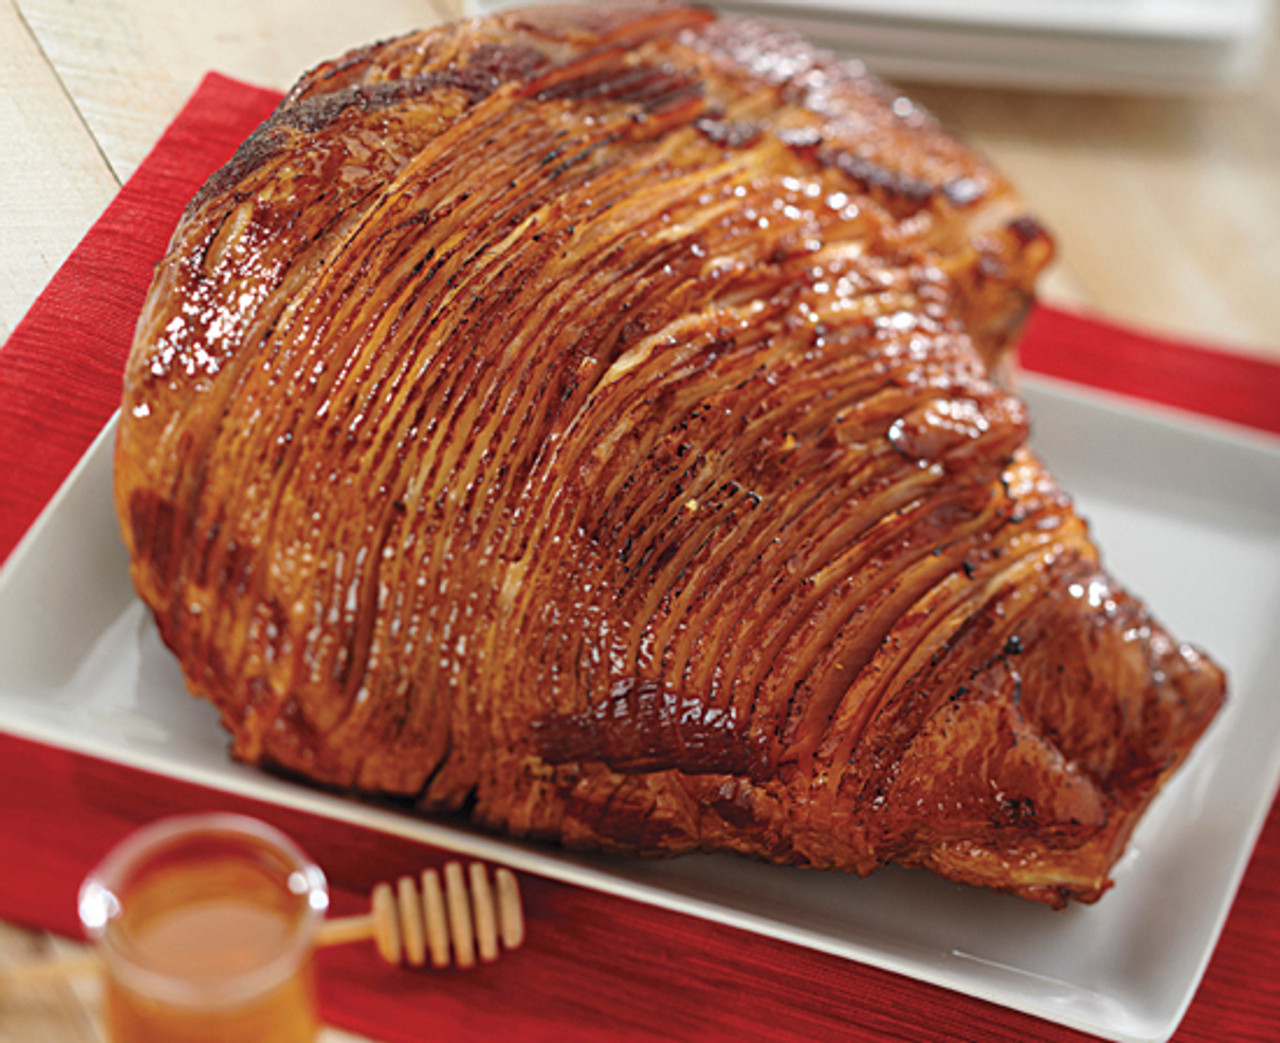 Smithfield Honey Cured And Honey Glazed Spiral Sliced Whole Ham Price Includes Shipping The 3665